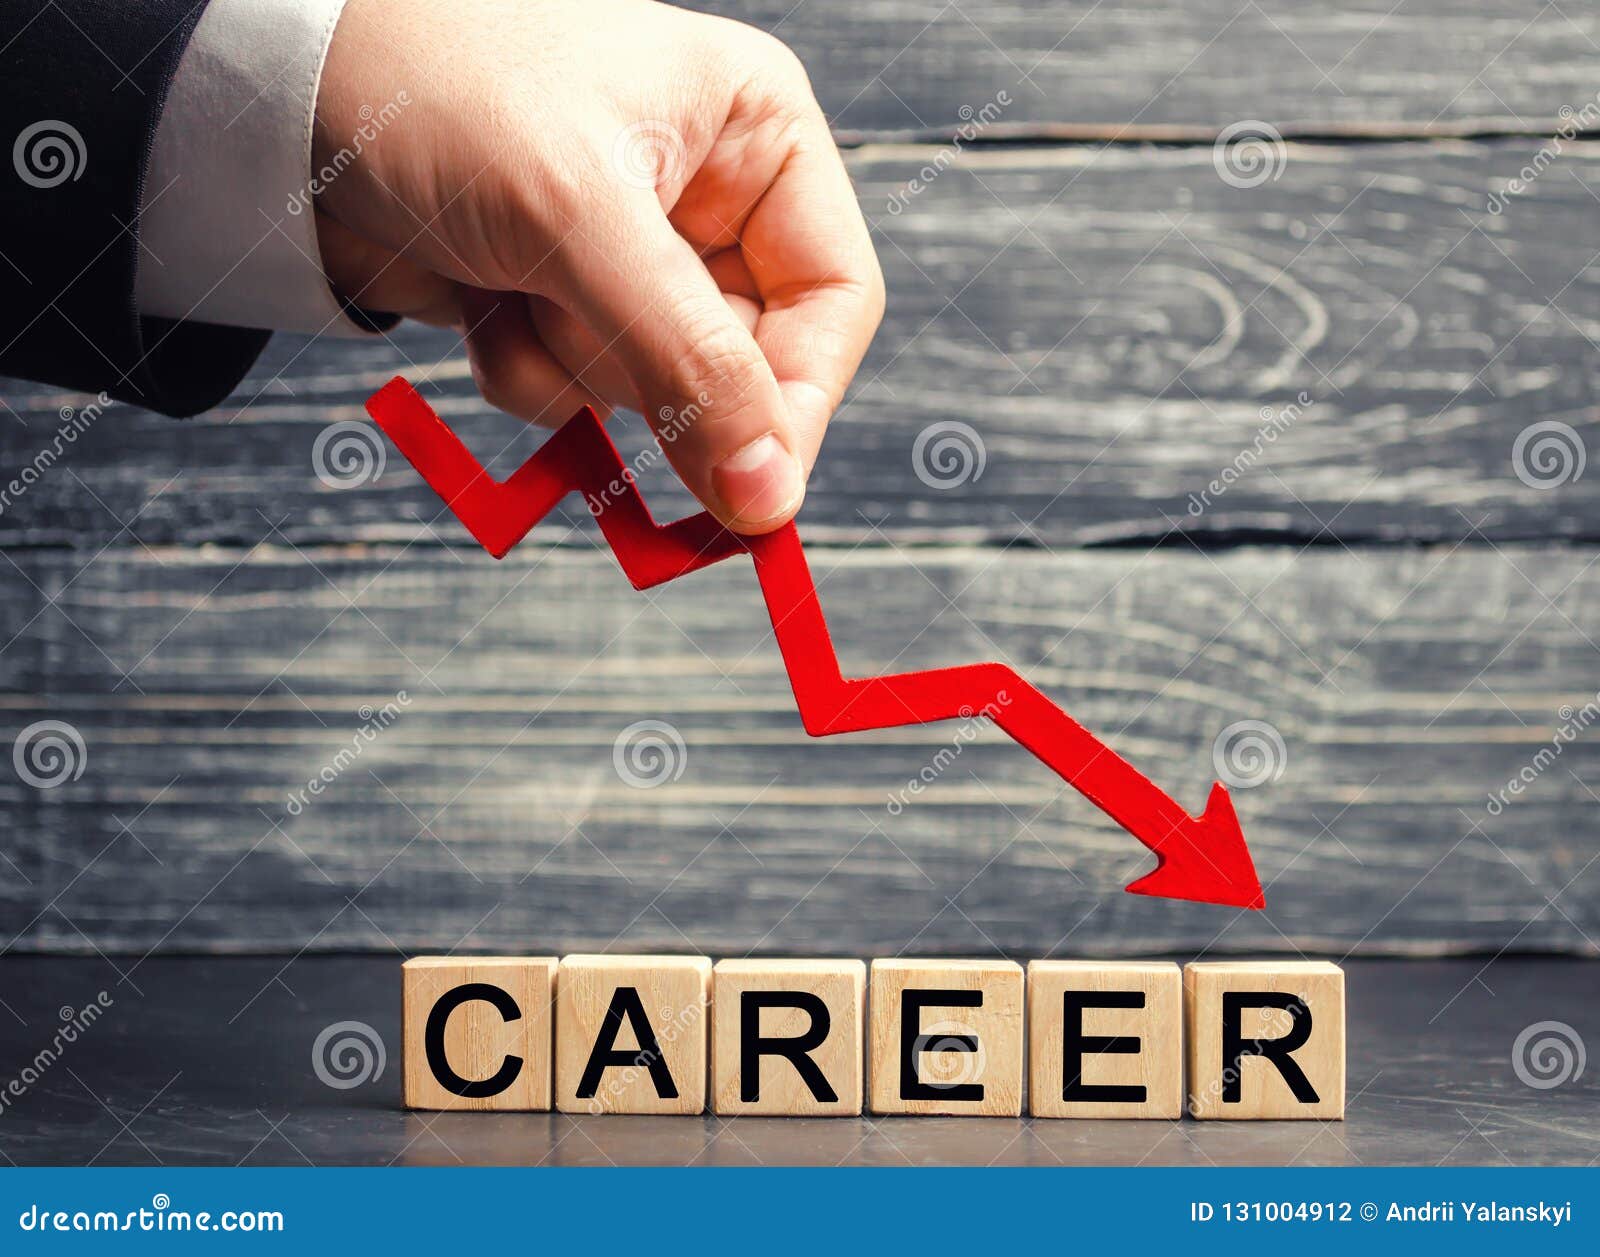 the inscription `career` and the red arrow down. career down. a demotion, a career crisis. lowering the standard of living. cutbac